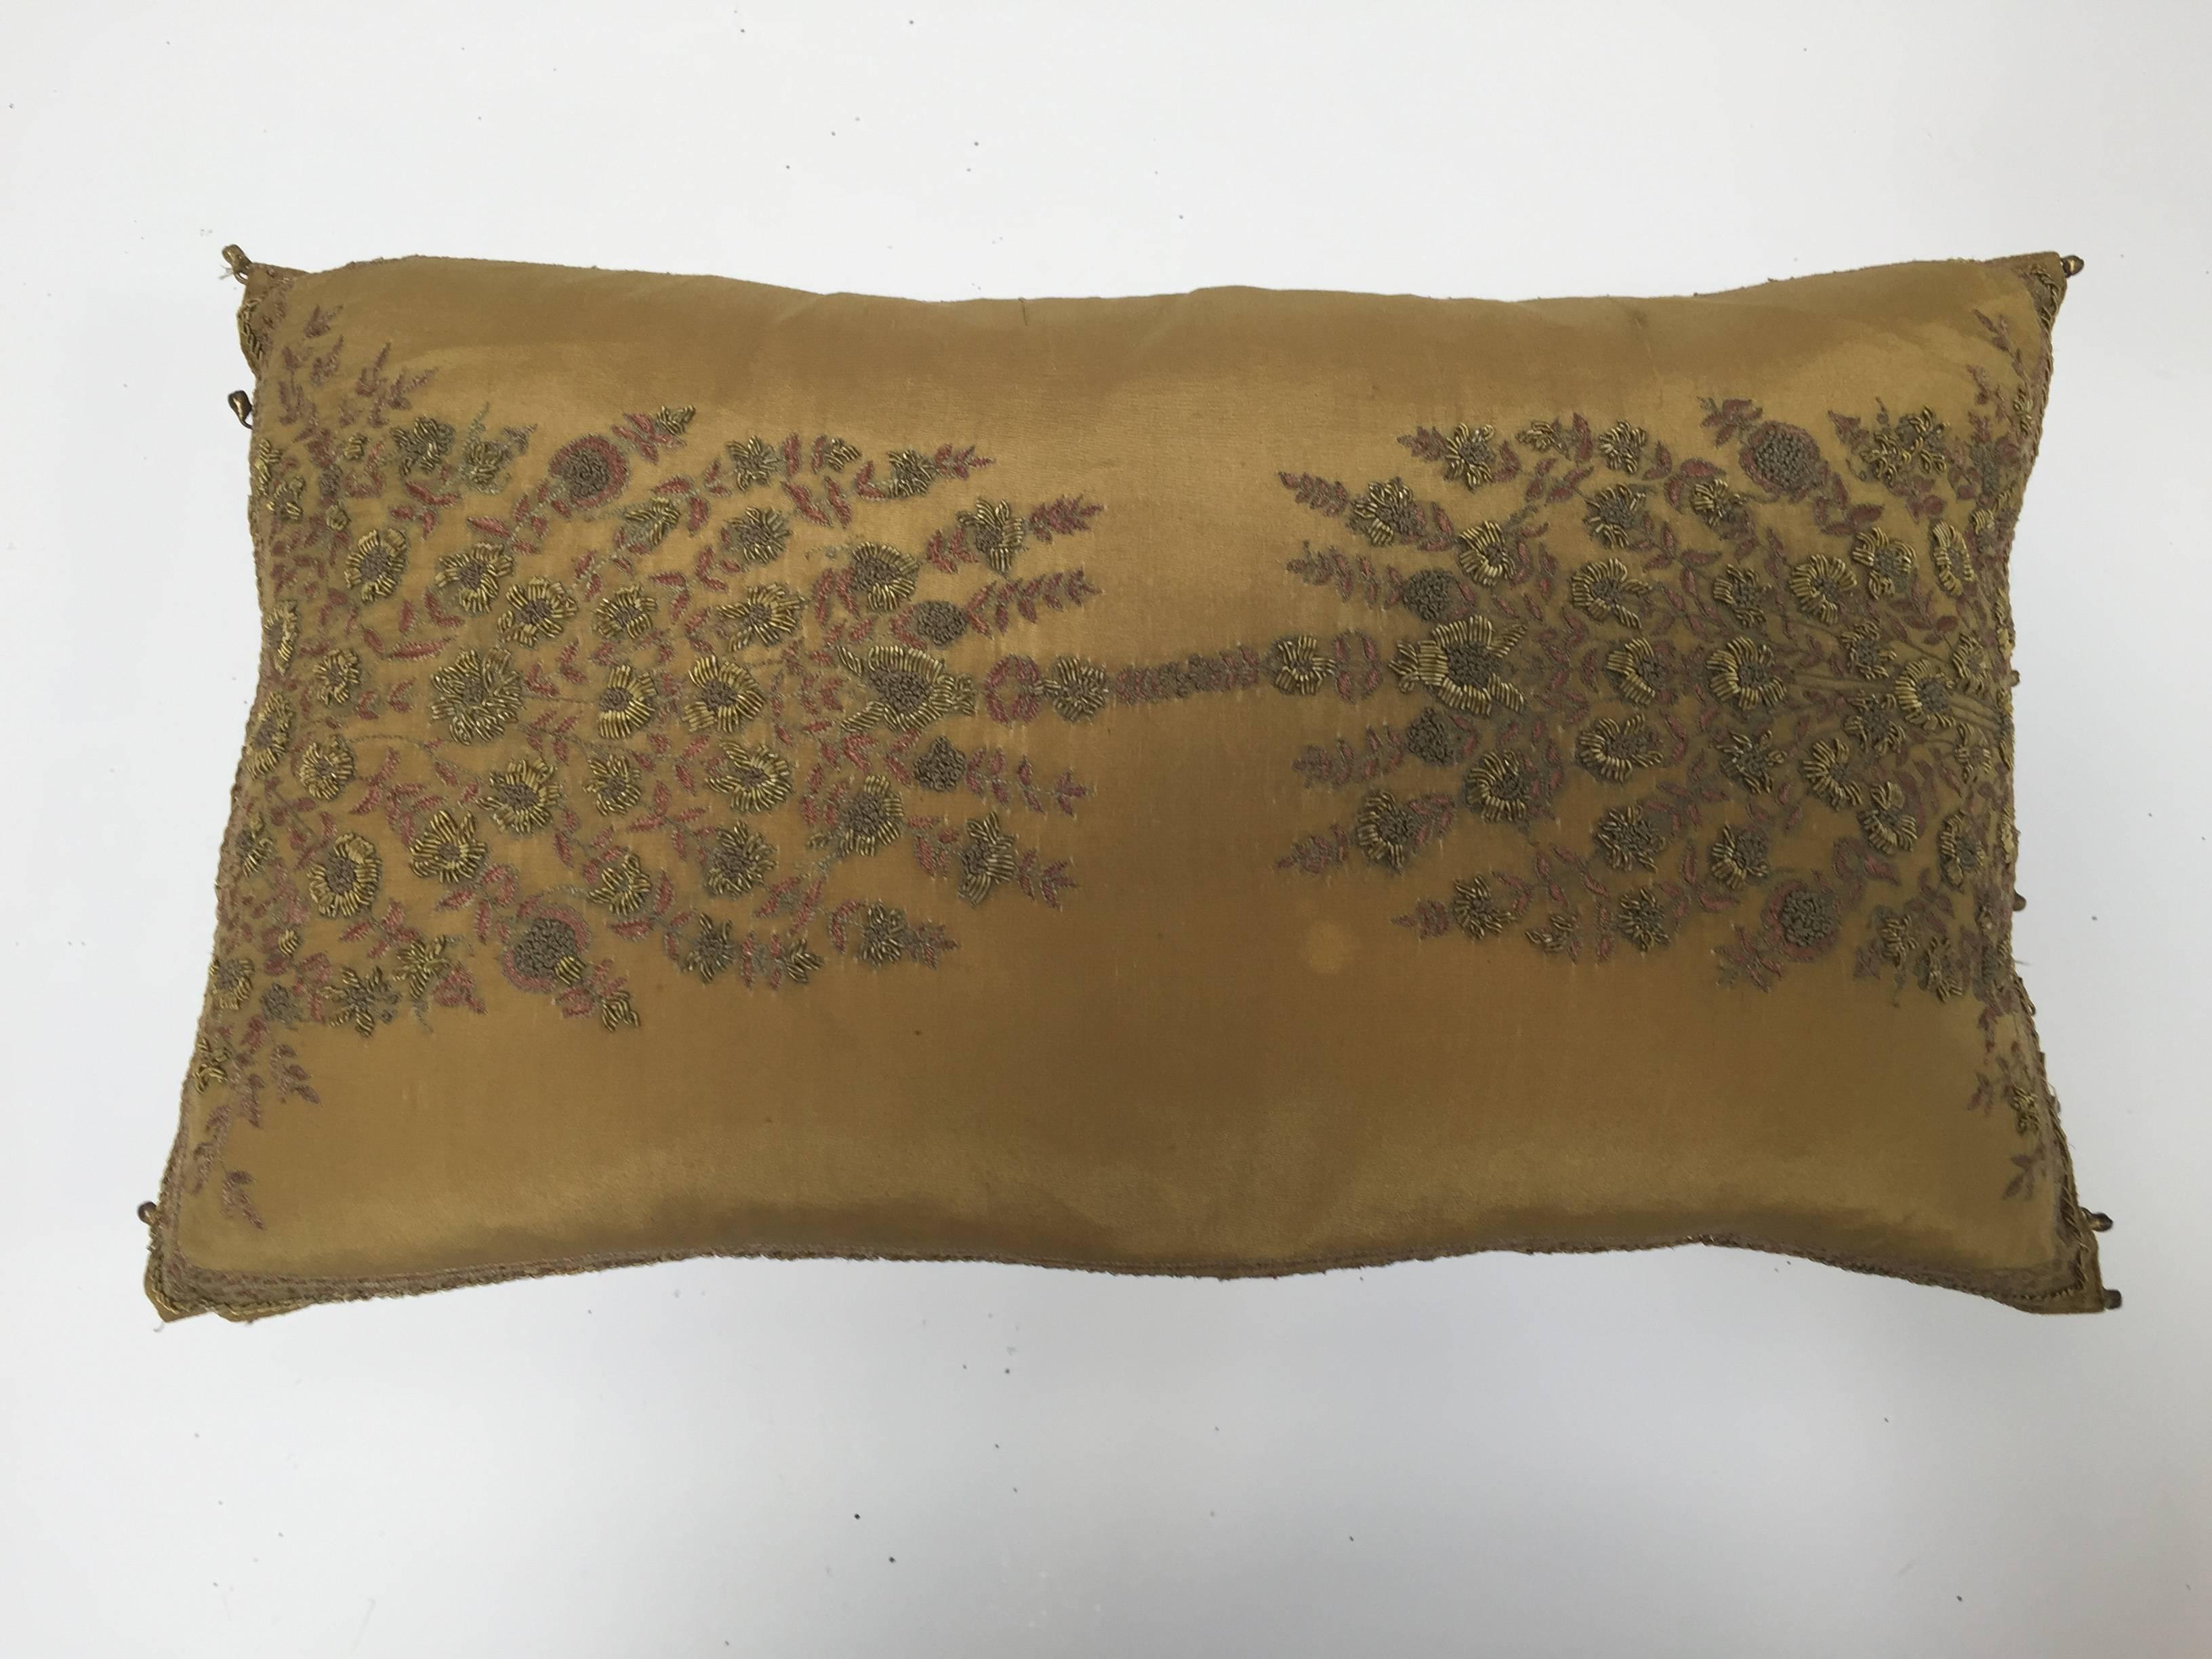 Throw pillow with raised gold metallic embroidery of vining flowers bronze silk.
By the J J Valaya 